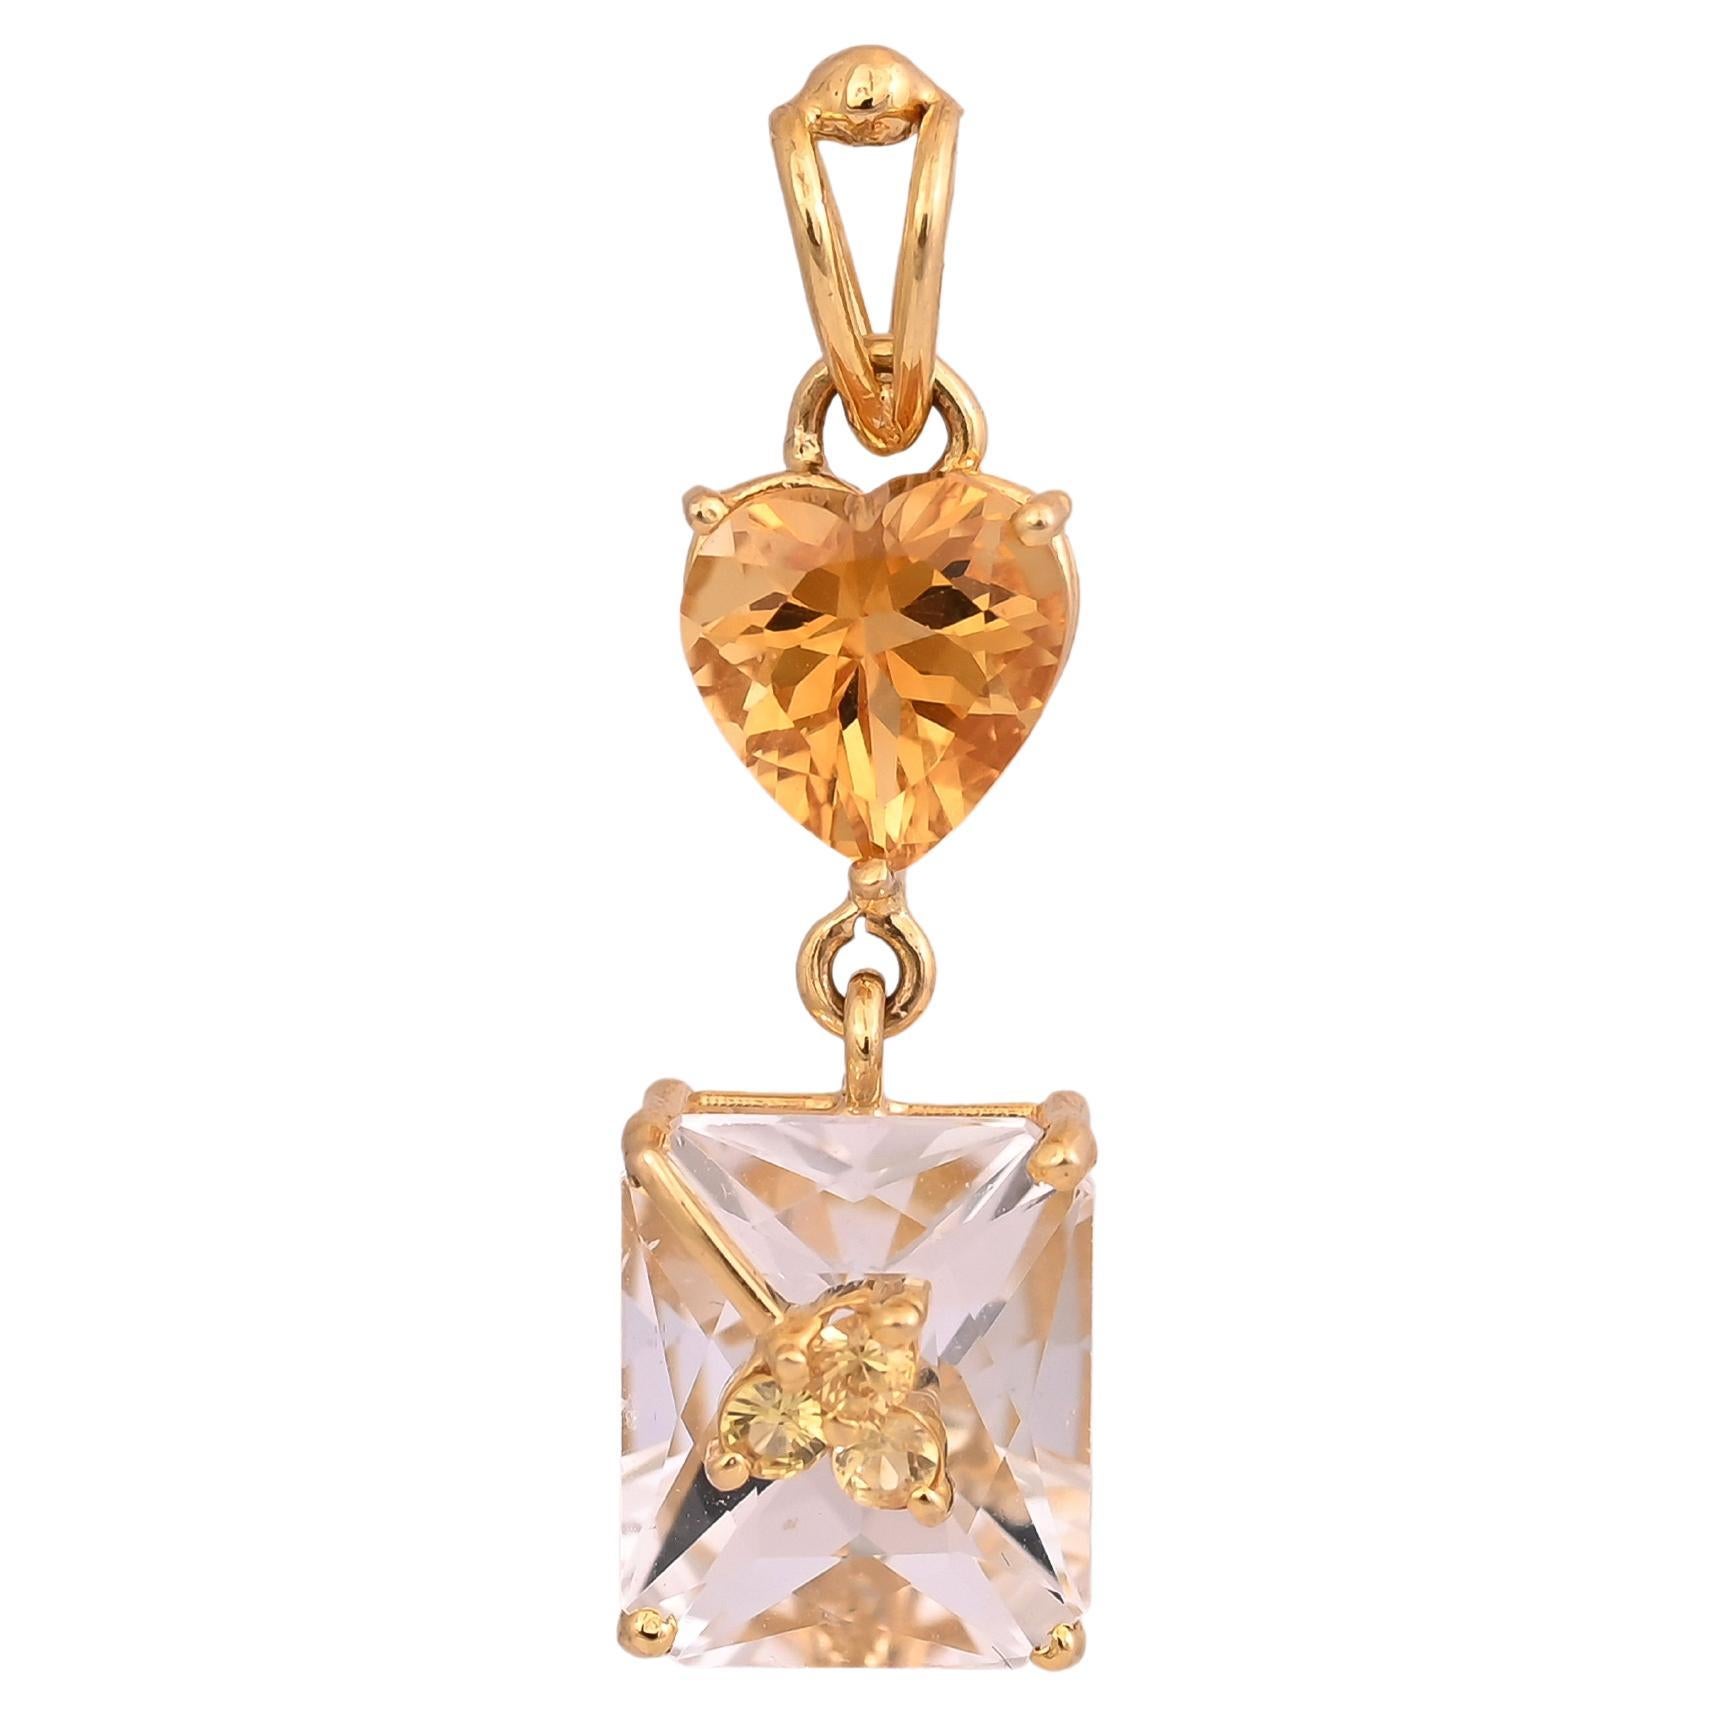 A very gorgeous and chic, Rock Crystal, Yellow Sapphire & Citrine Pendant Necklace & Earrings set crafted in 18K Yellow Gold. The weight of the Rock Crystals is 17.19 carats. The weight of the Citrine is 4.69 carats. The Yellow Sapphires weight is